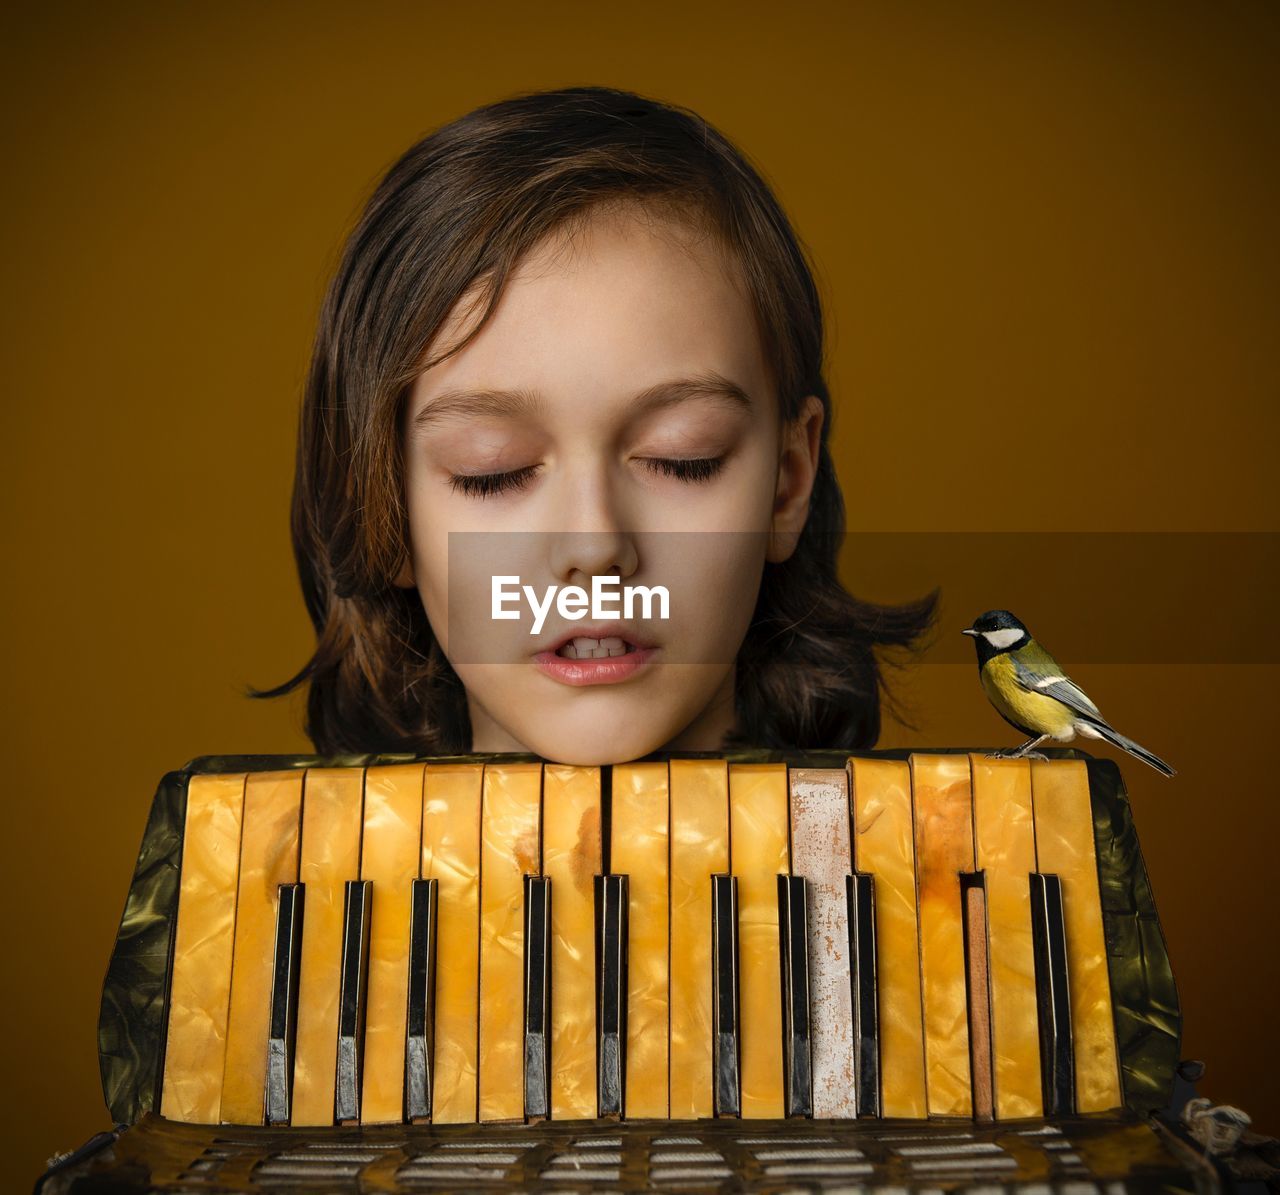 Close-up of a kid near accordion keys with the tit bird